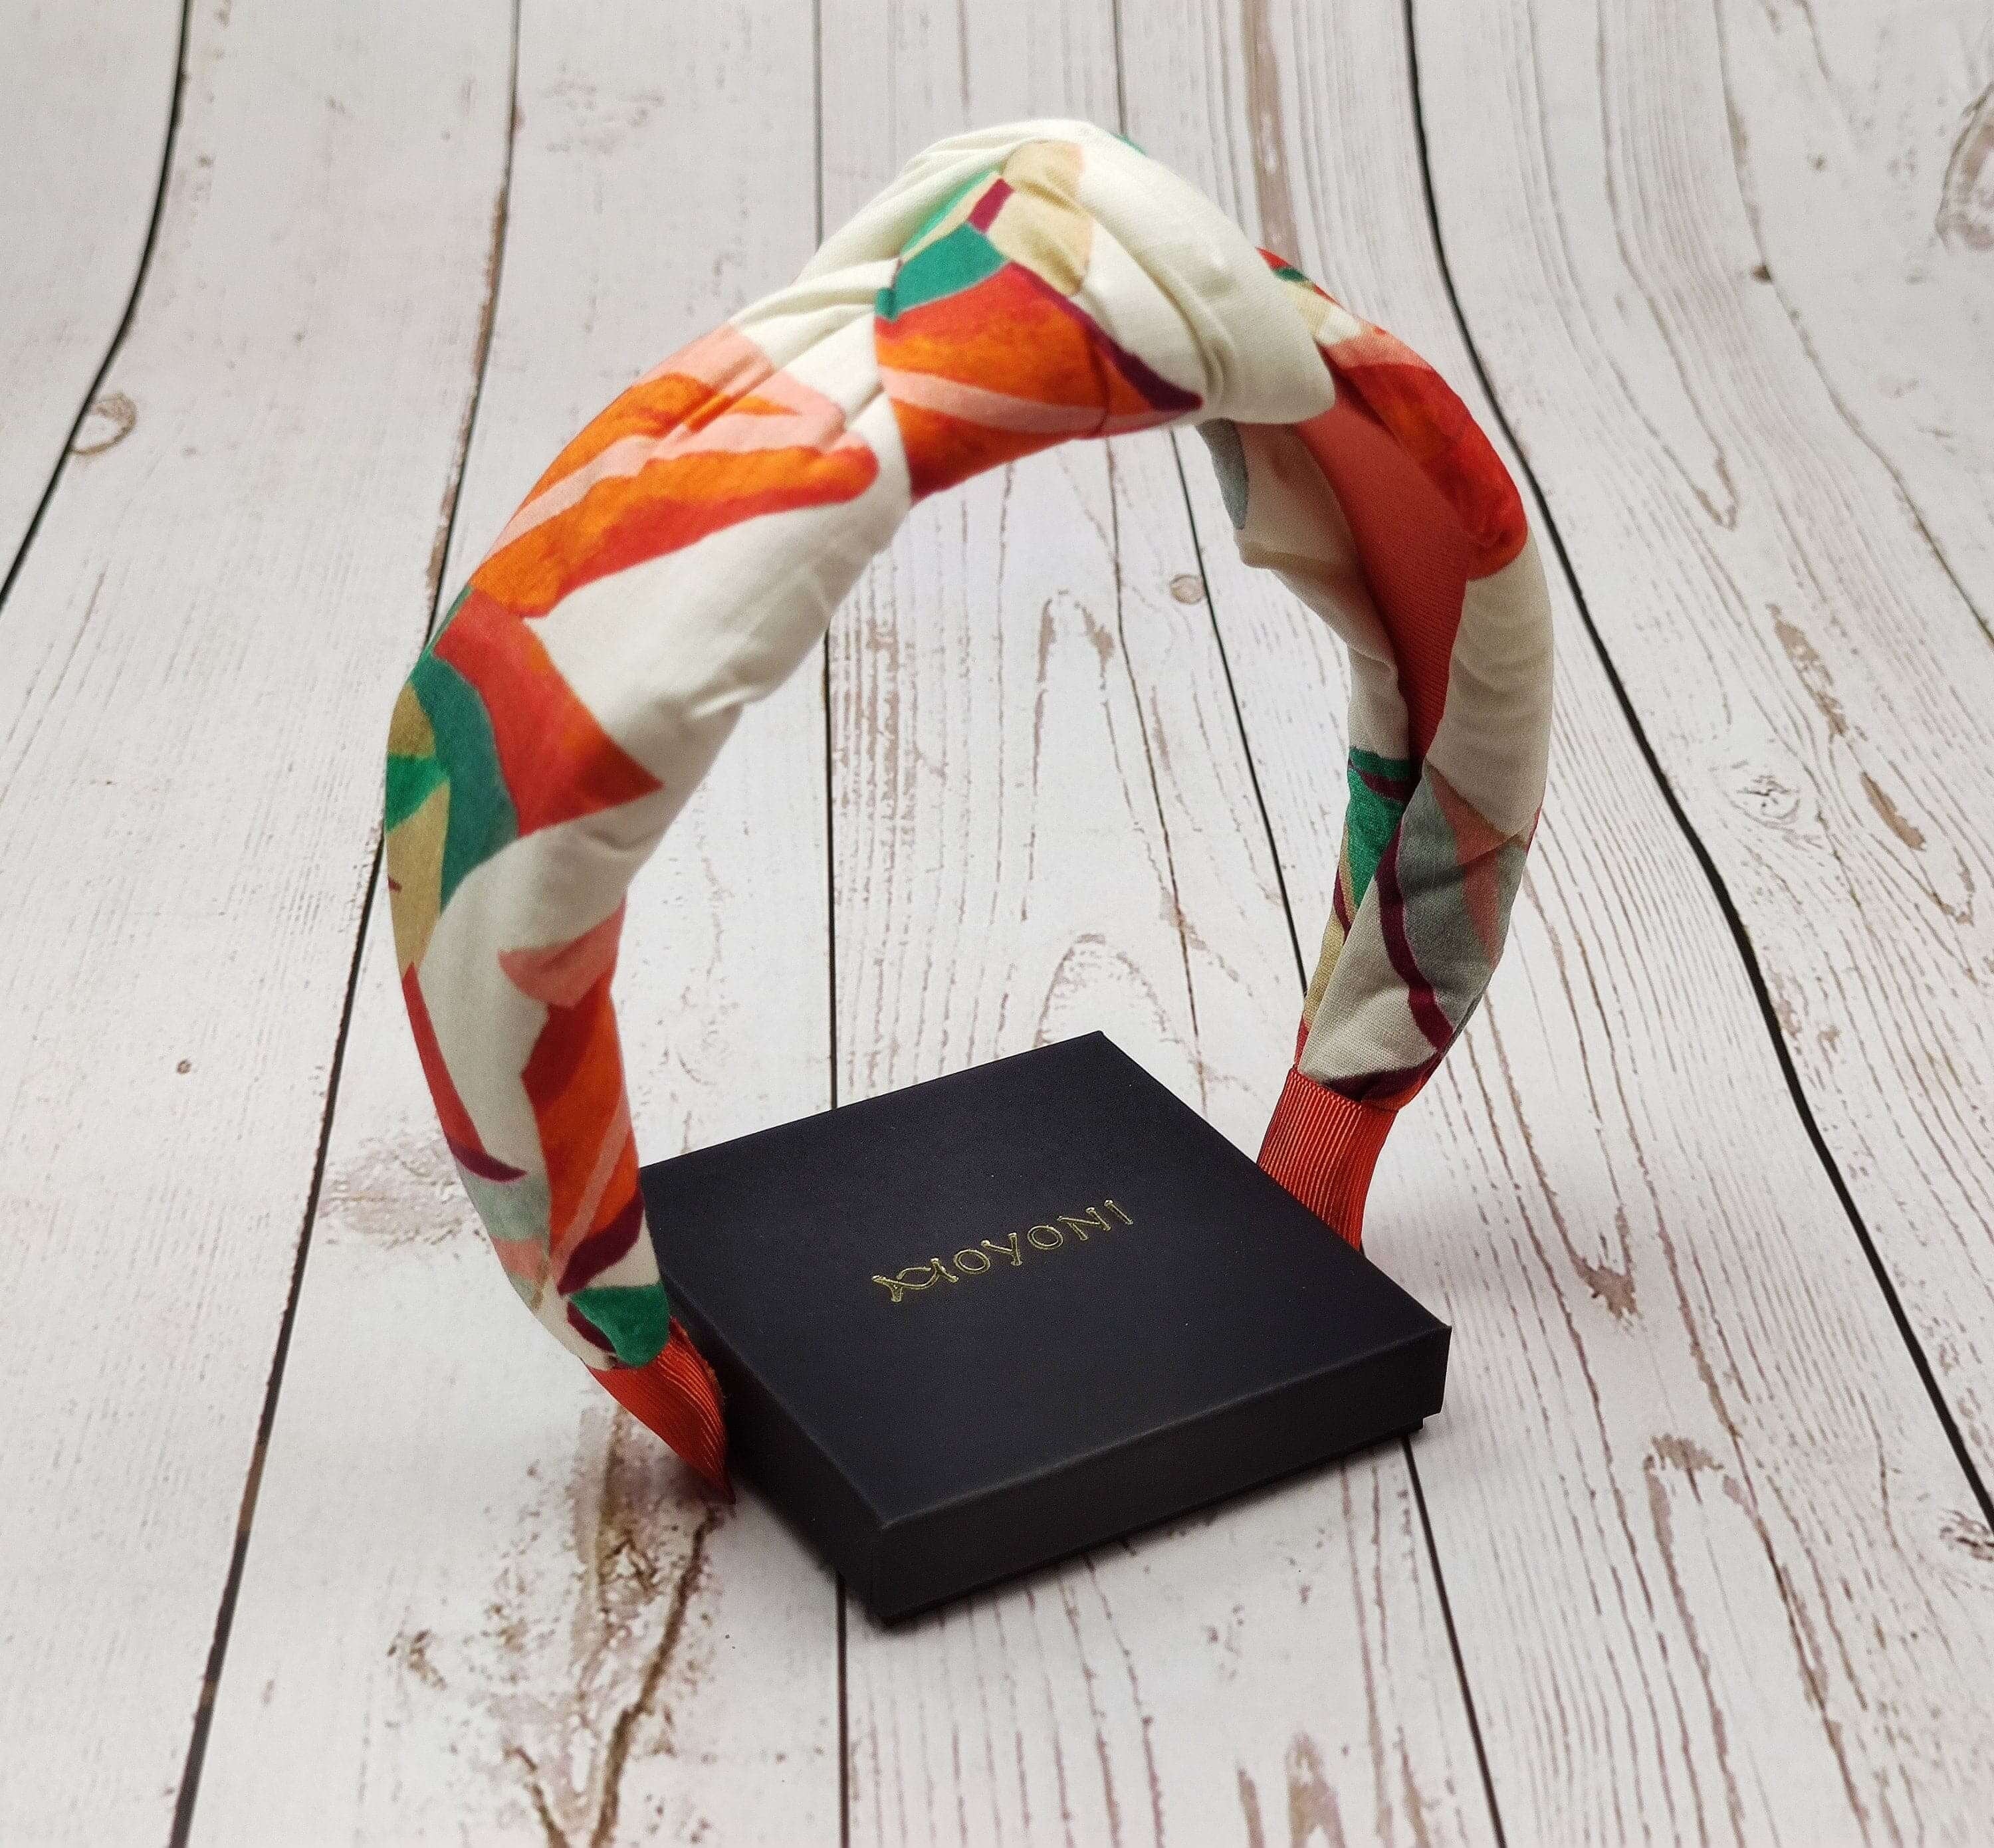 Add a pop of color to her hair accessory collection with this trendy knotted headband in cream, orange, and green.